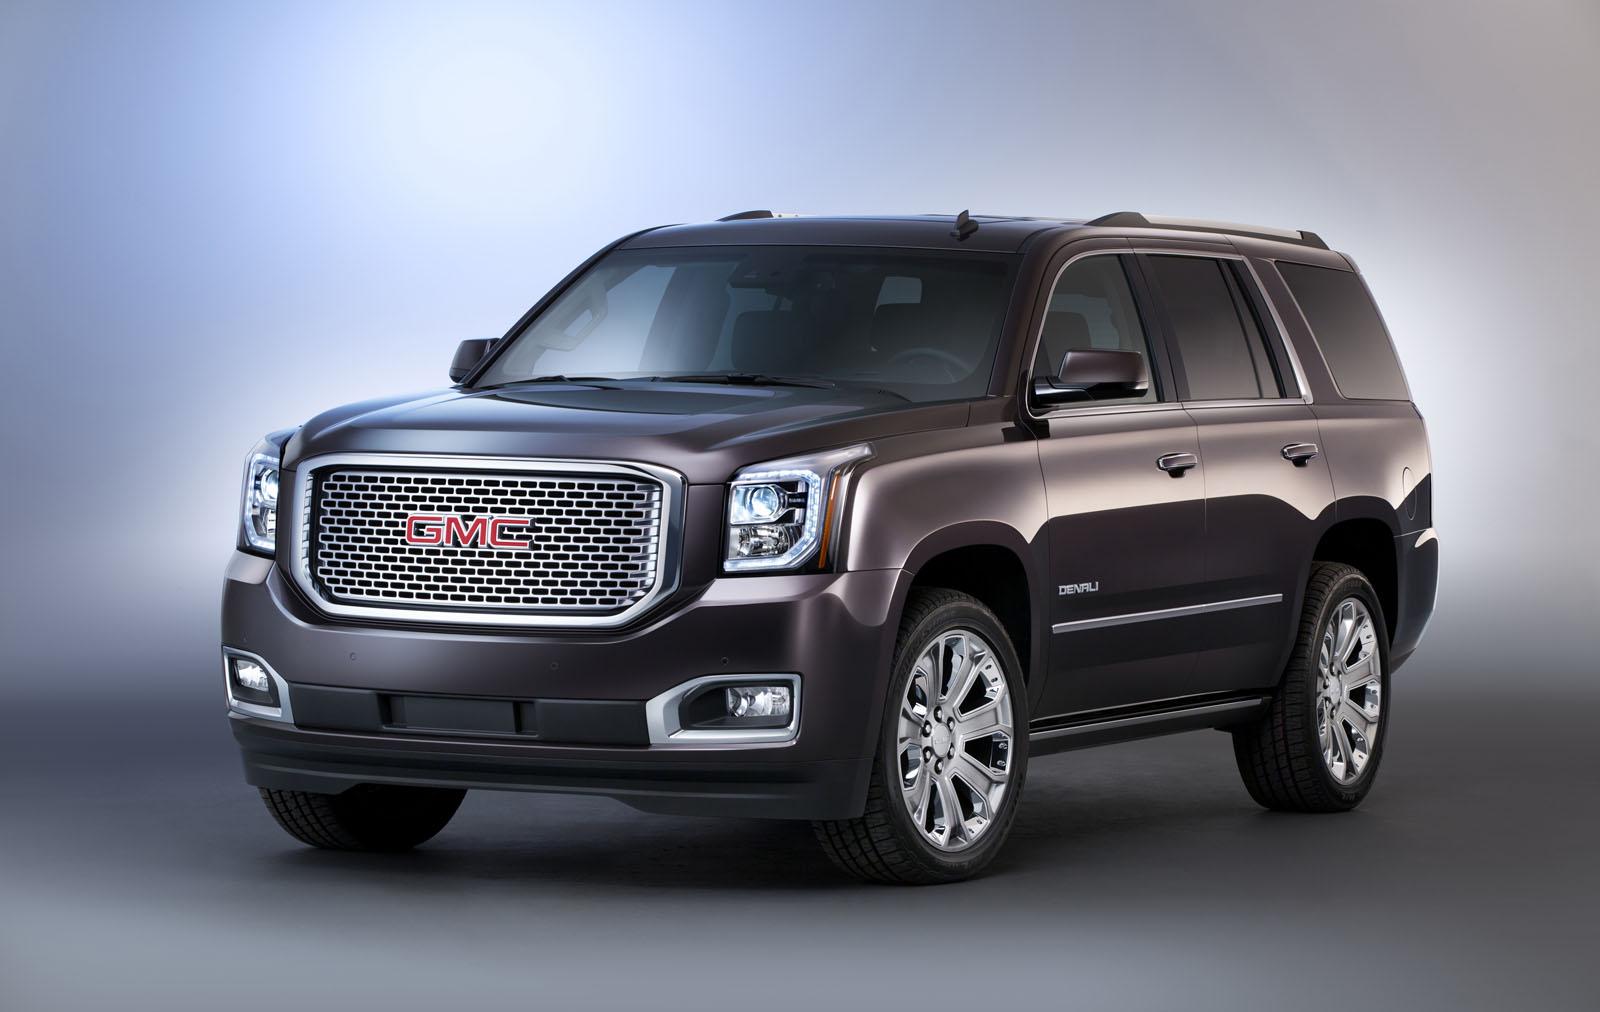 Does Gmc Have Any Rebates